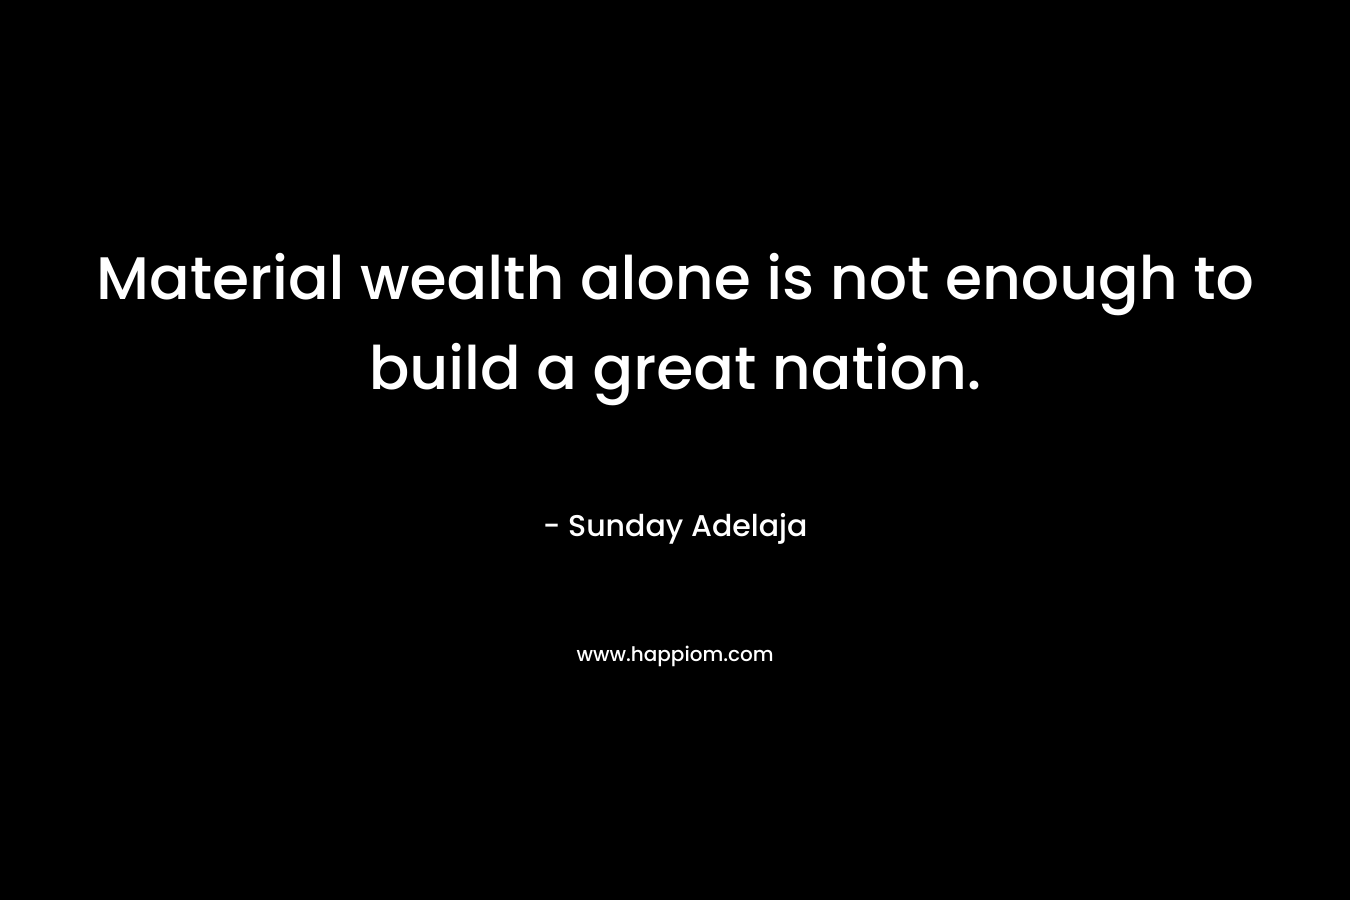 Material wealth alone is not enough to build a great nation.